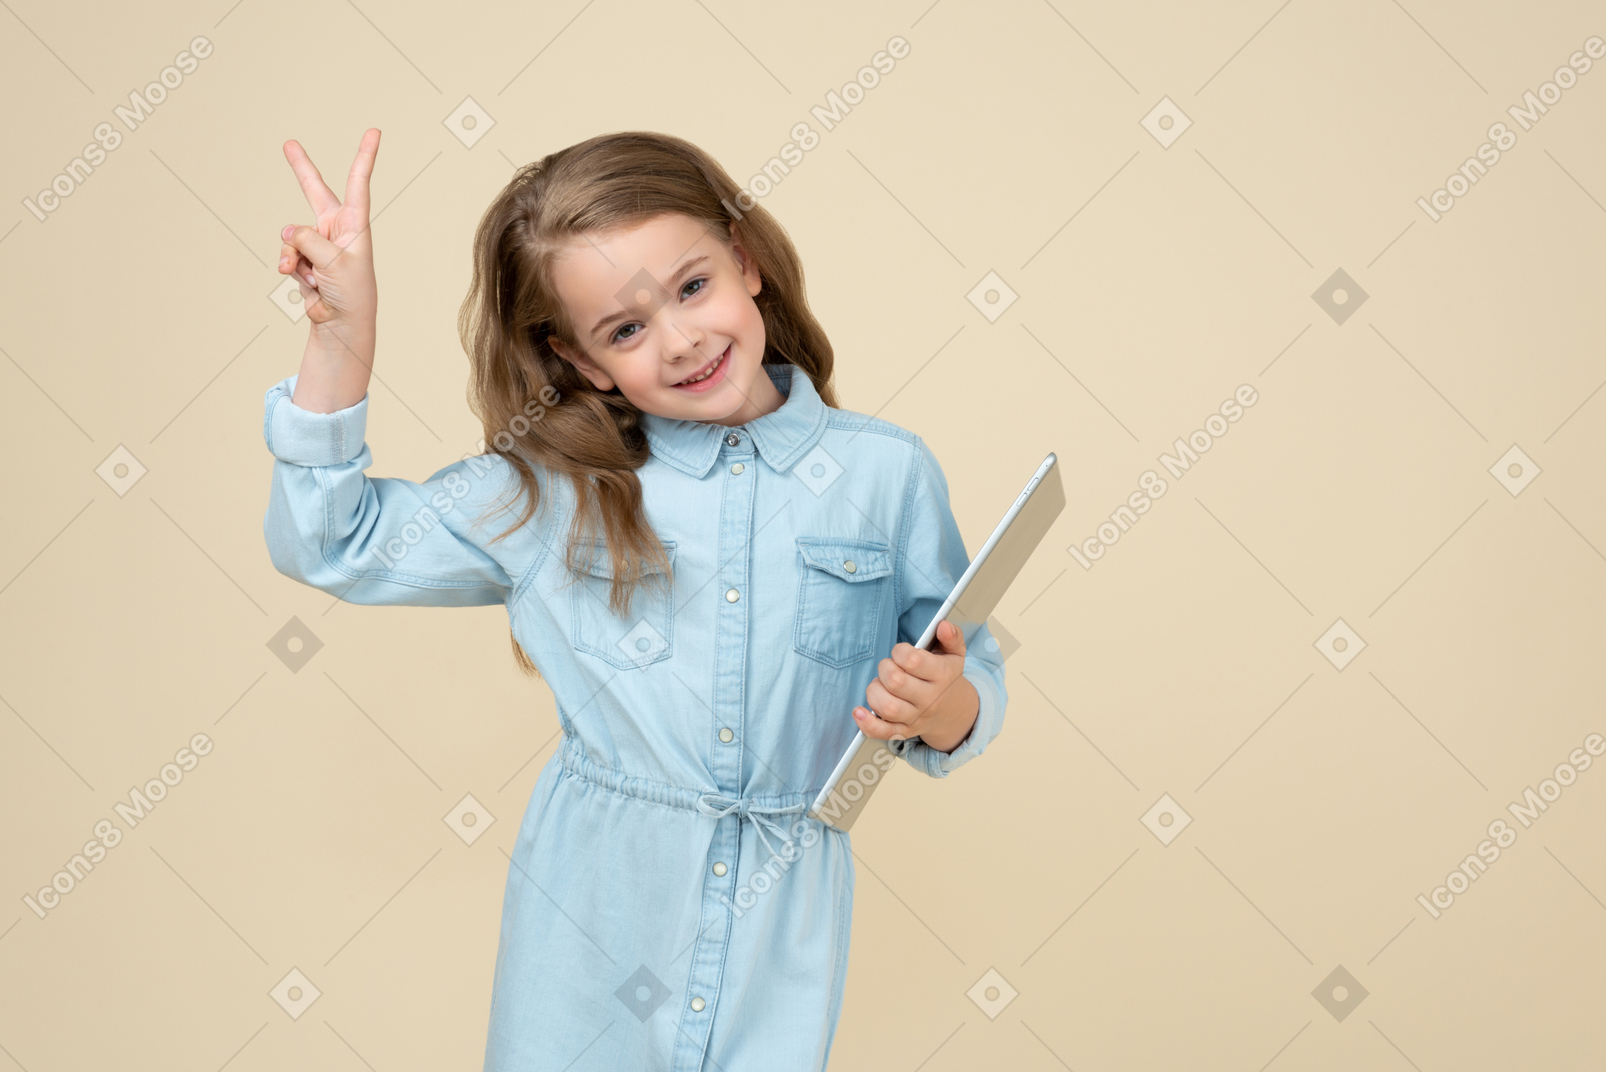 Cute little girl holding a tablet and showing v sign